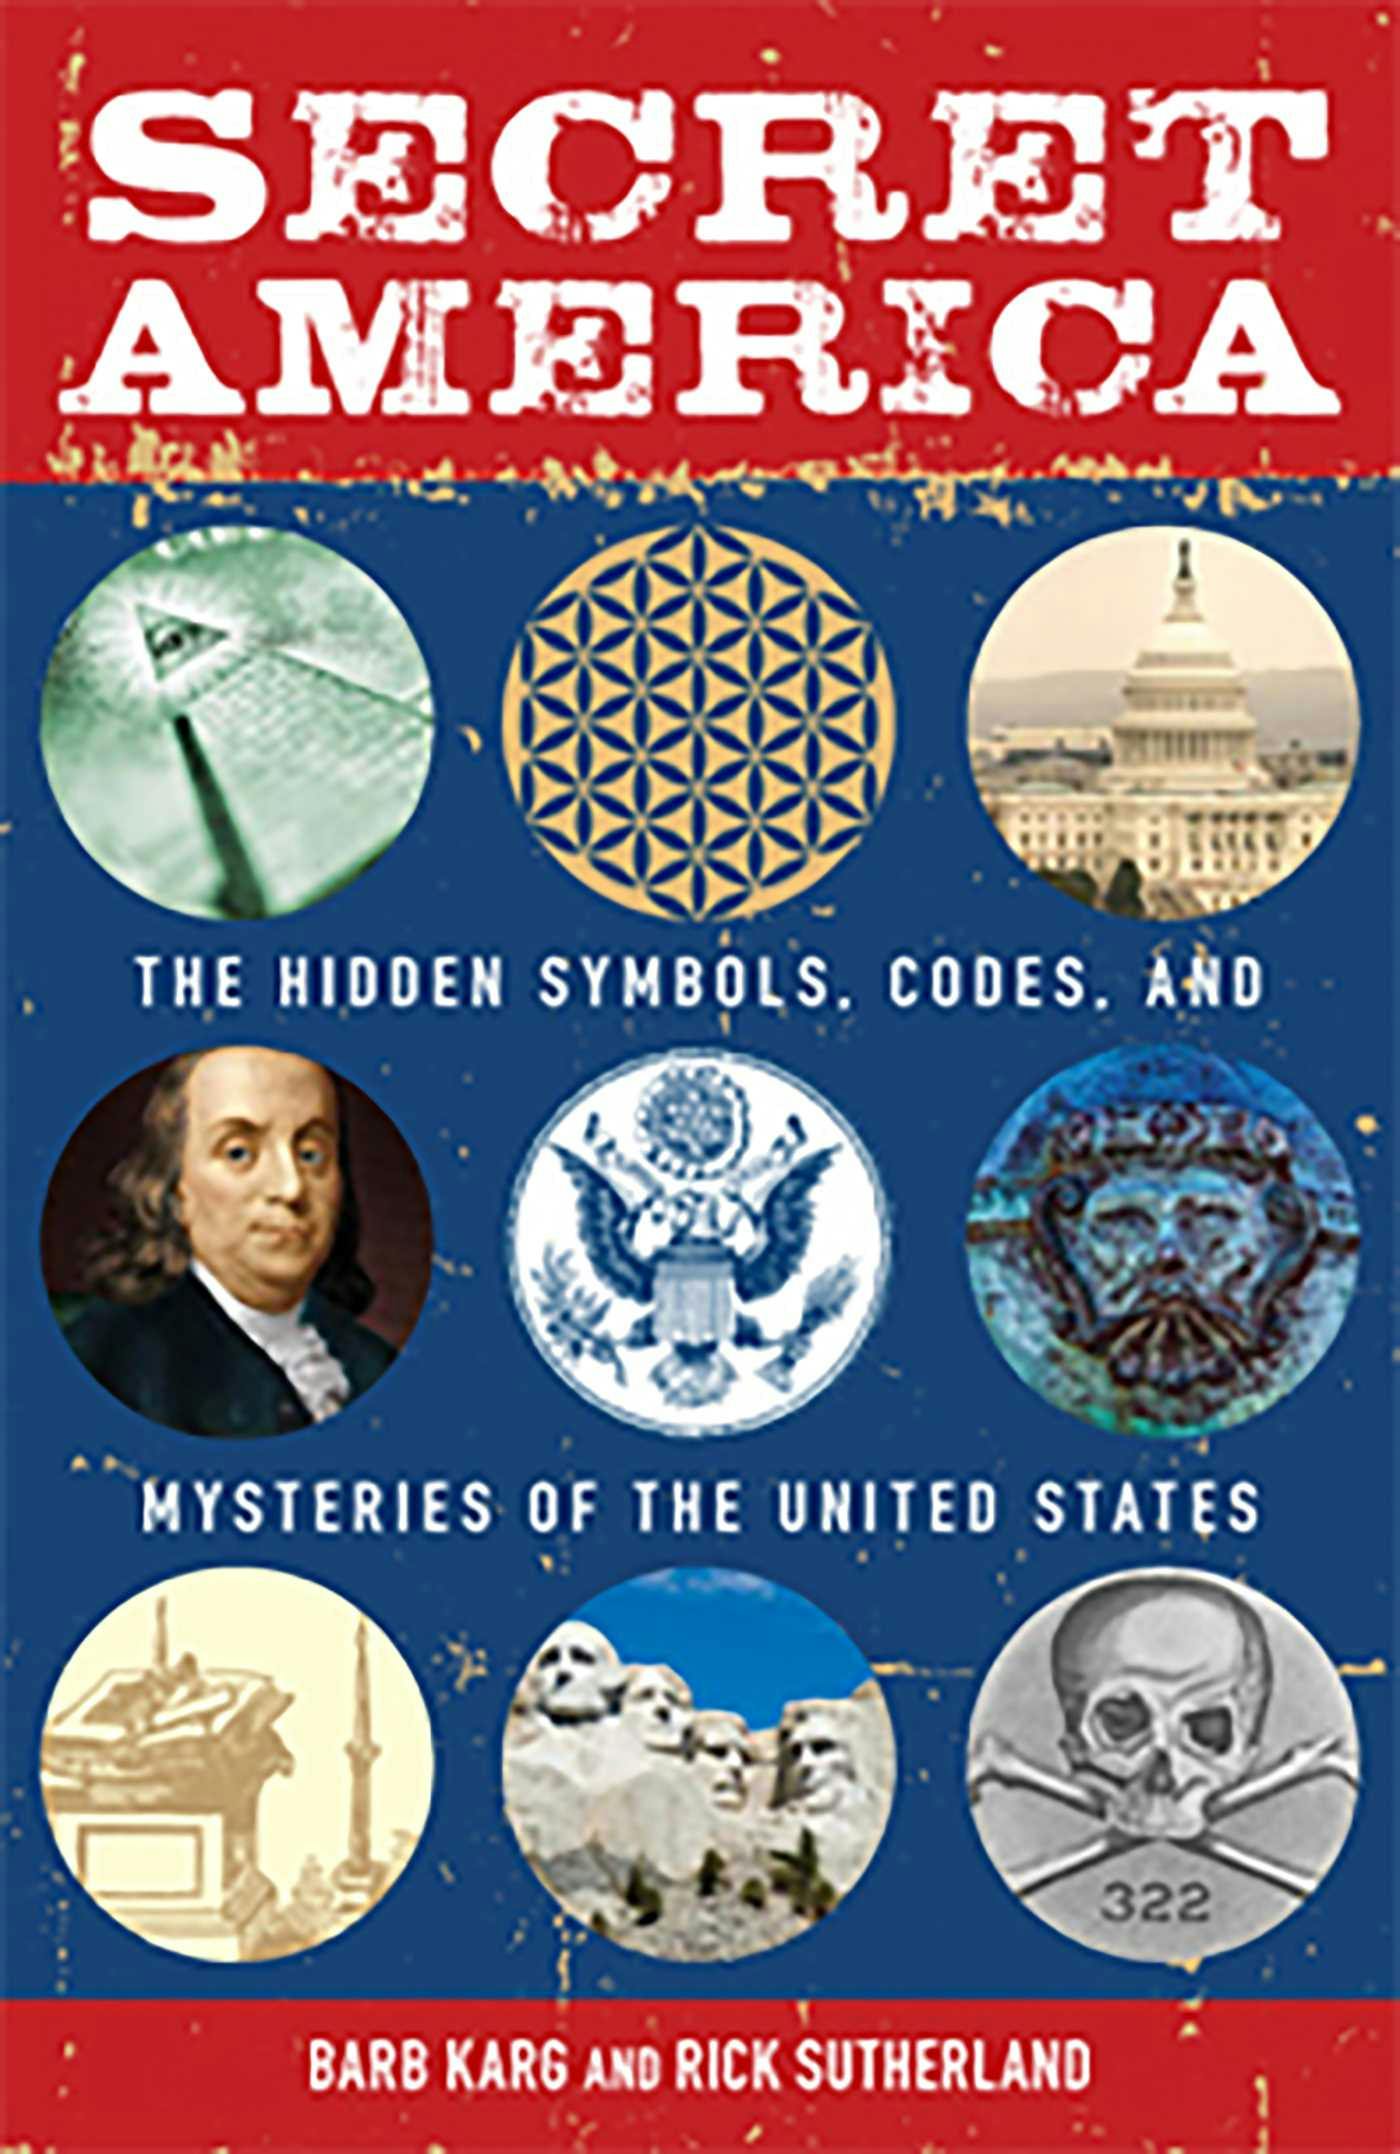 Secret America: The Hidden Symbols, Codes and Mysteries of the United States - Barb Karg, Rick Sutherland